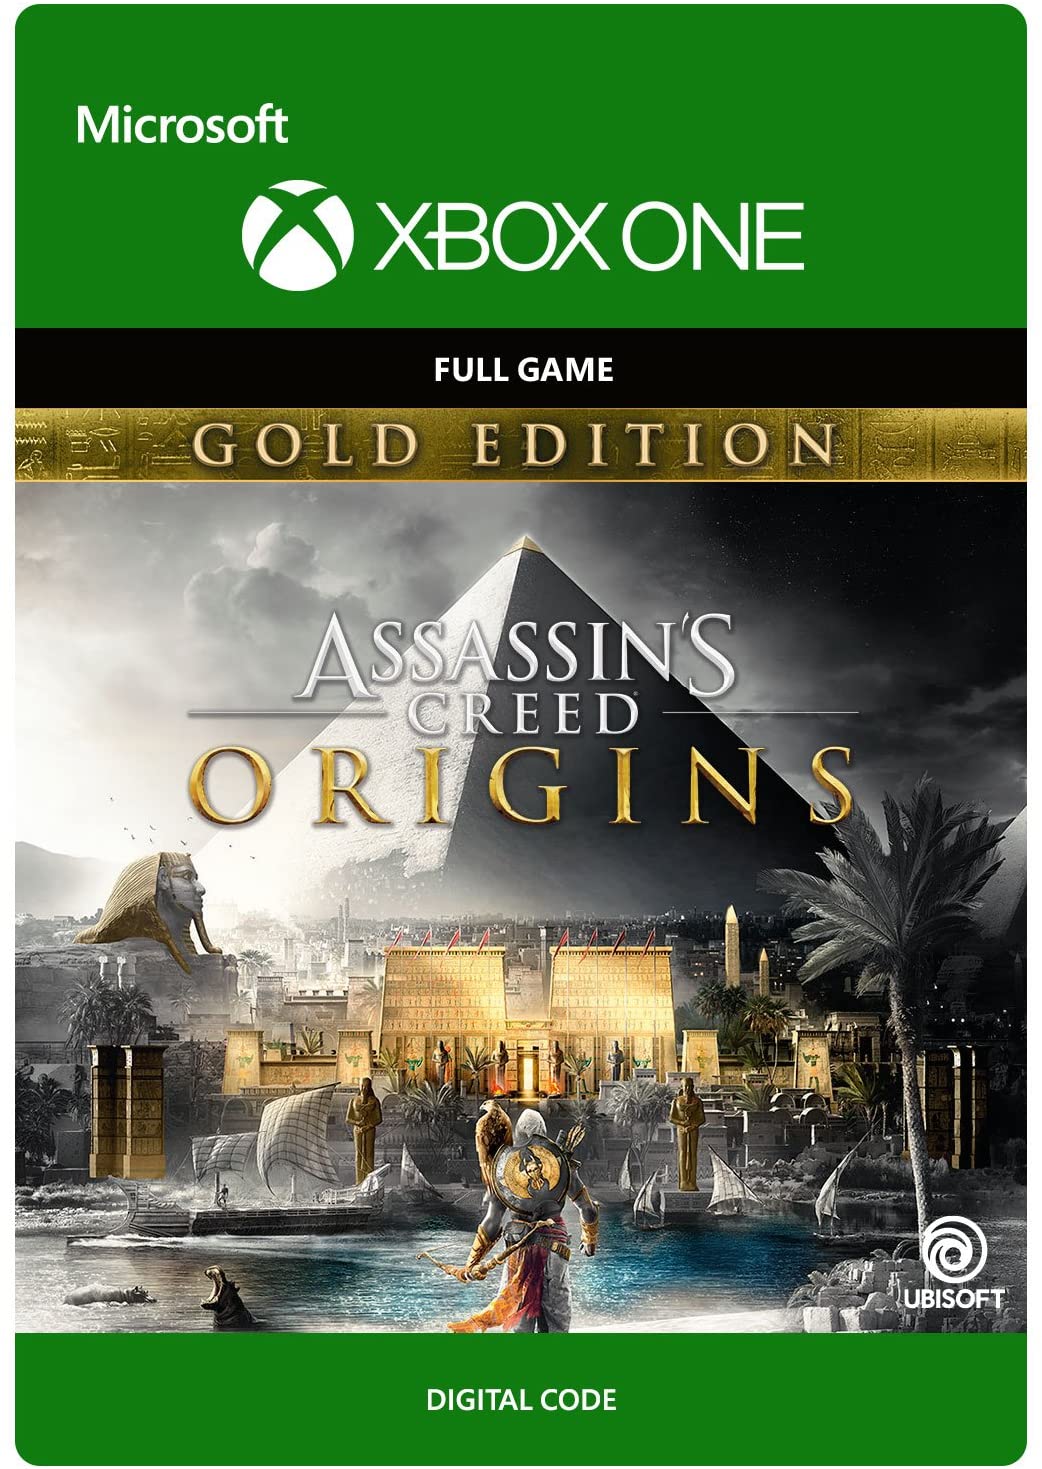 Assassin's Creed Origins Gold Edition Digital Download Key (Xbox One): Europe - 